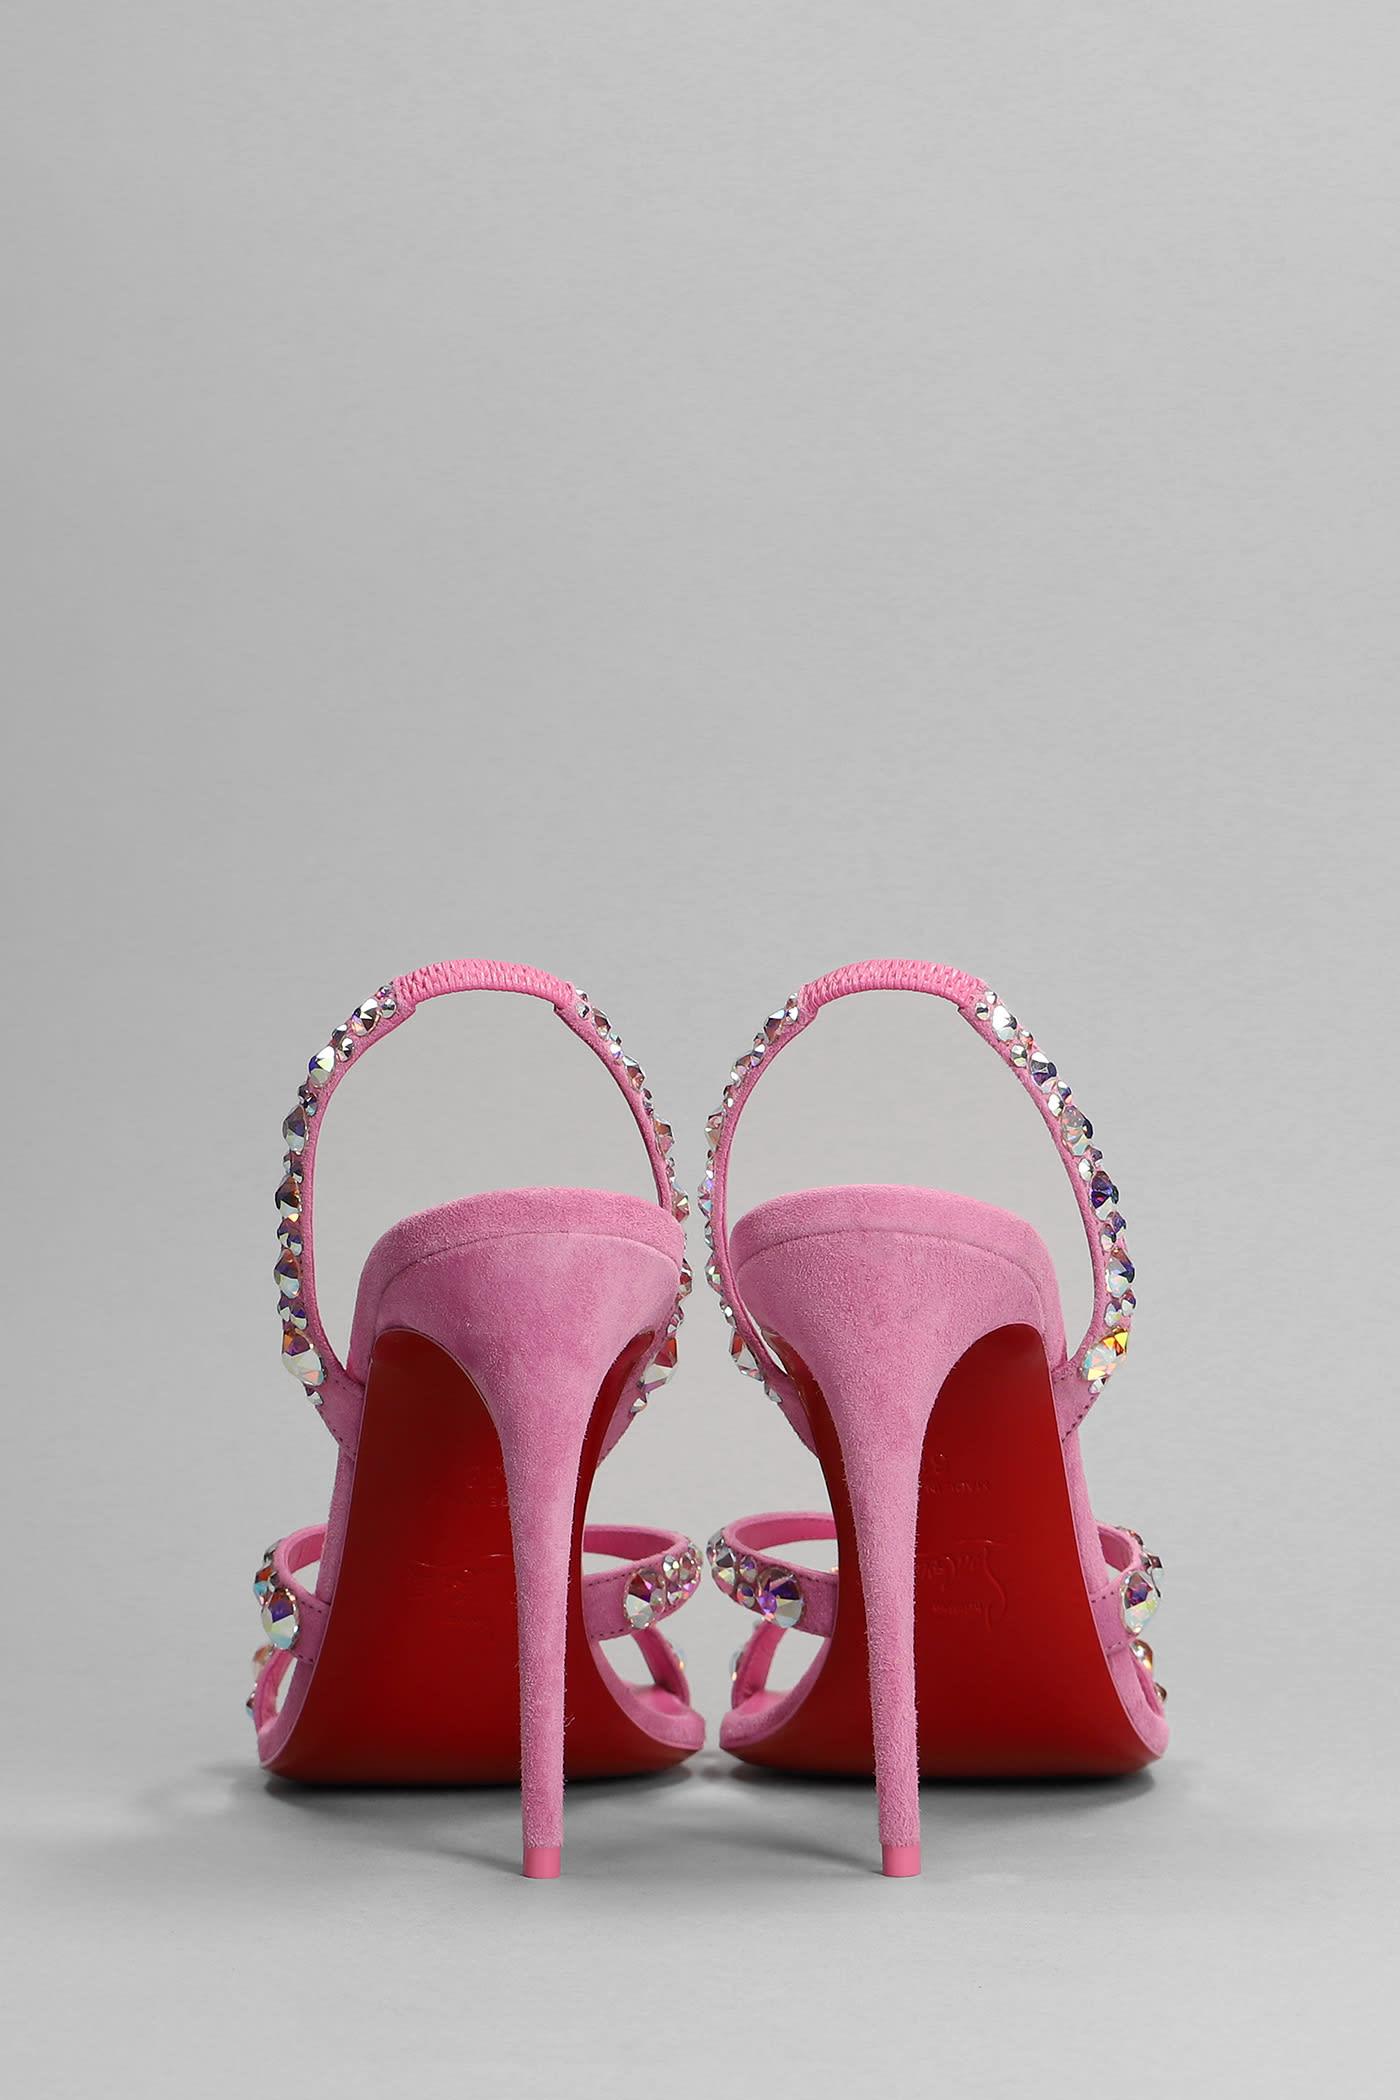 Christian Louboutin Emilie 100 Sandals In Suede in Pink | Lyst